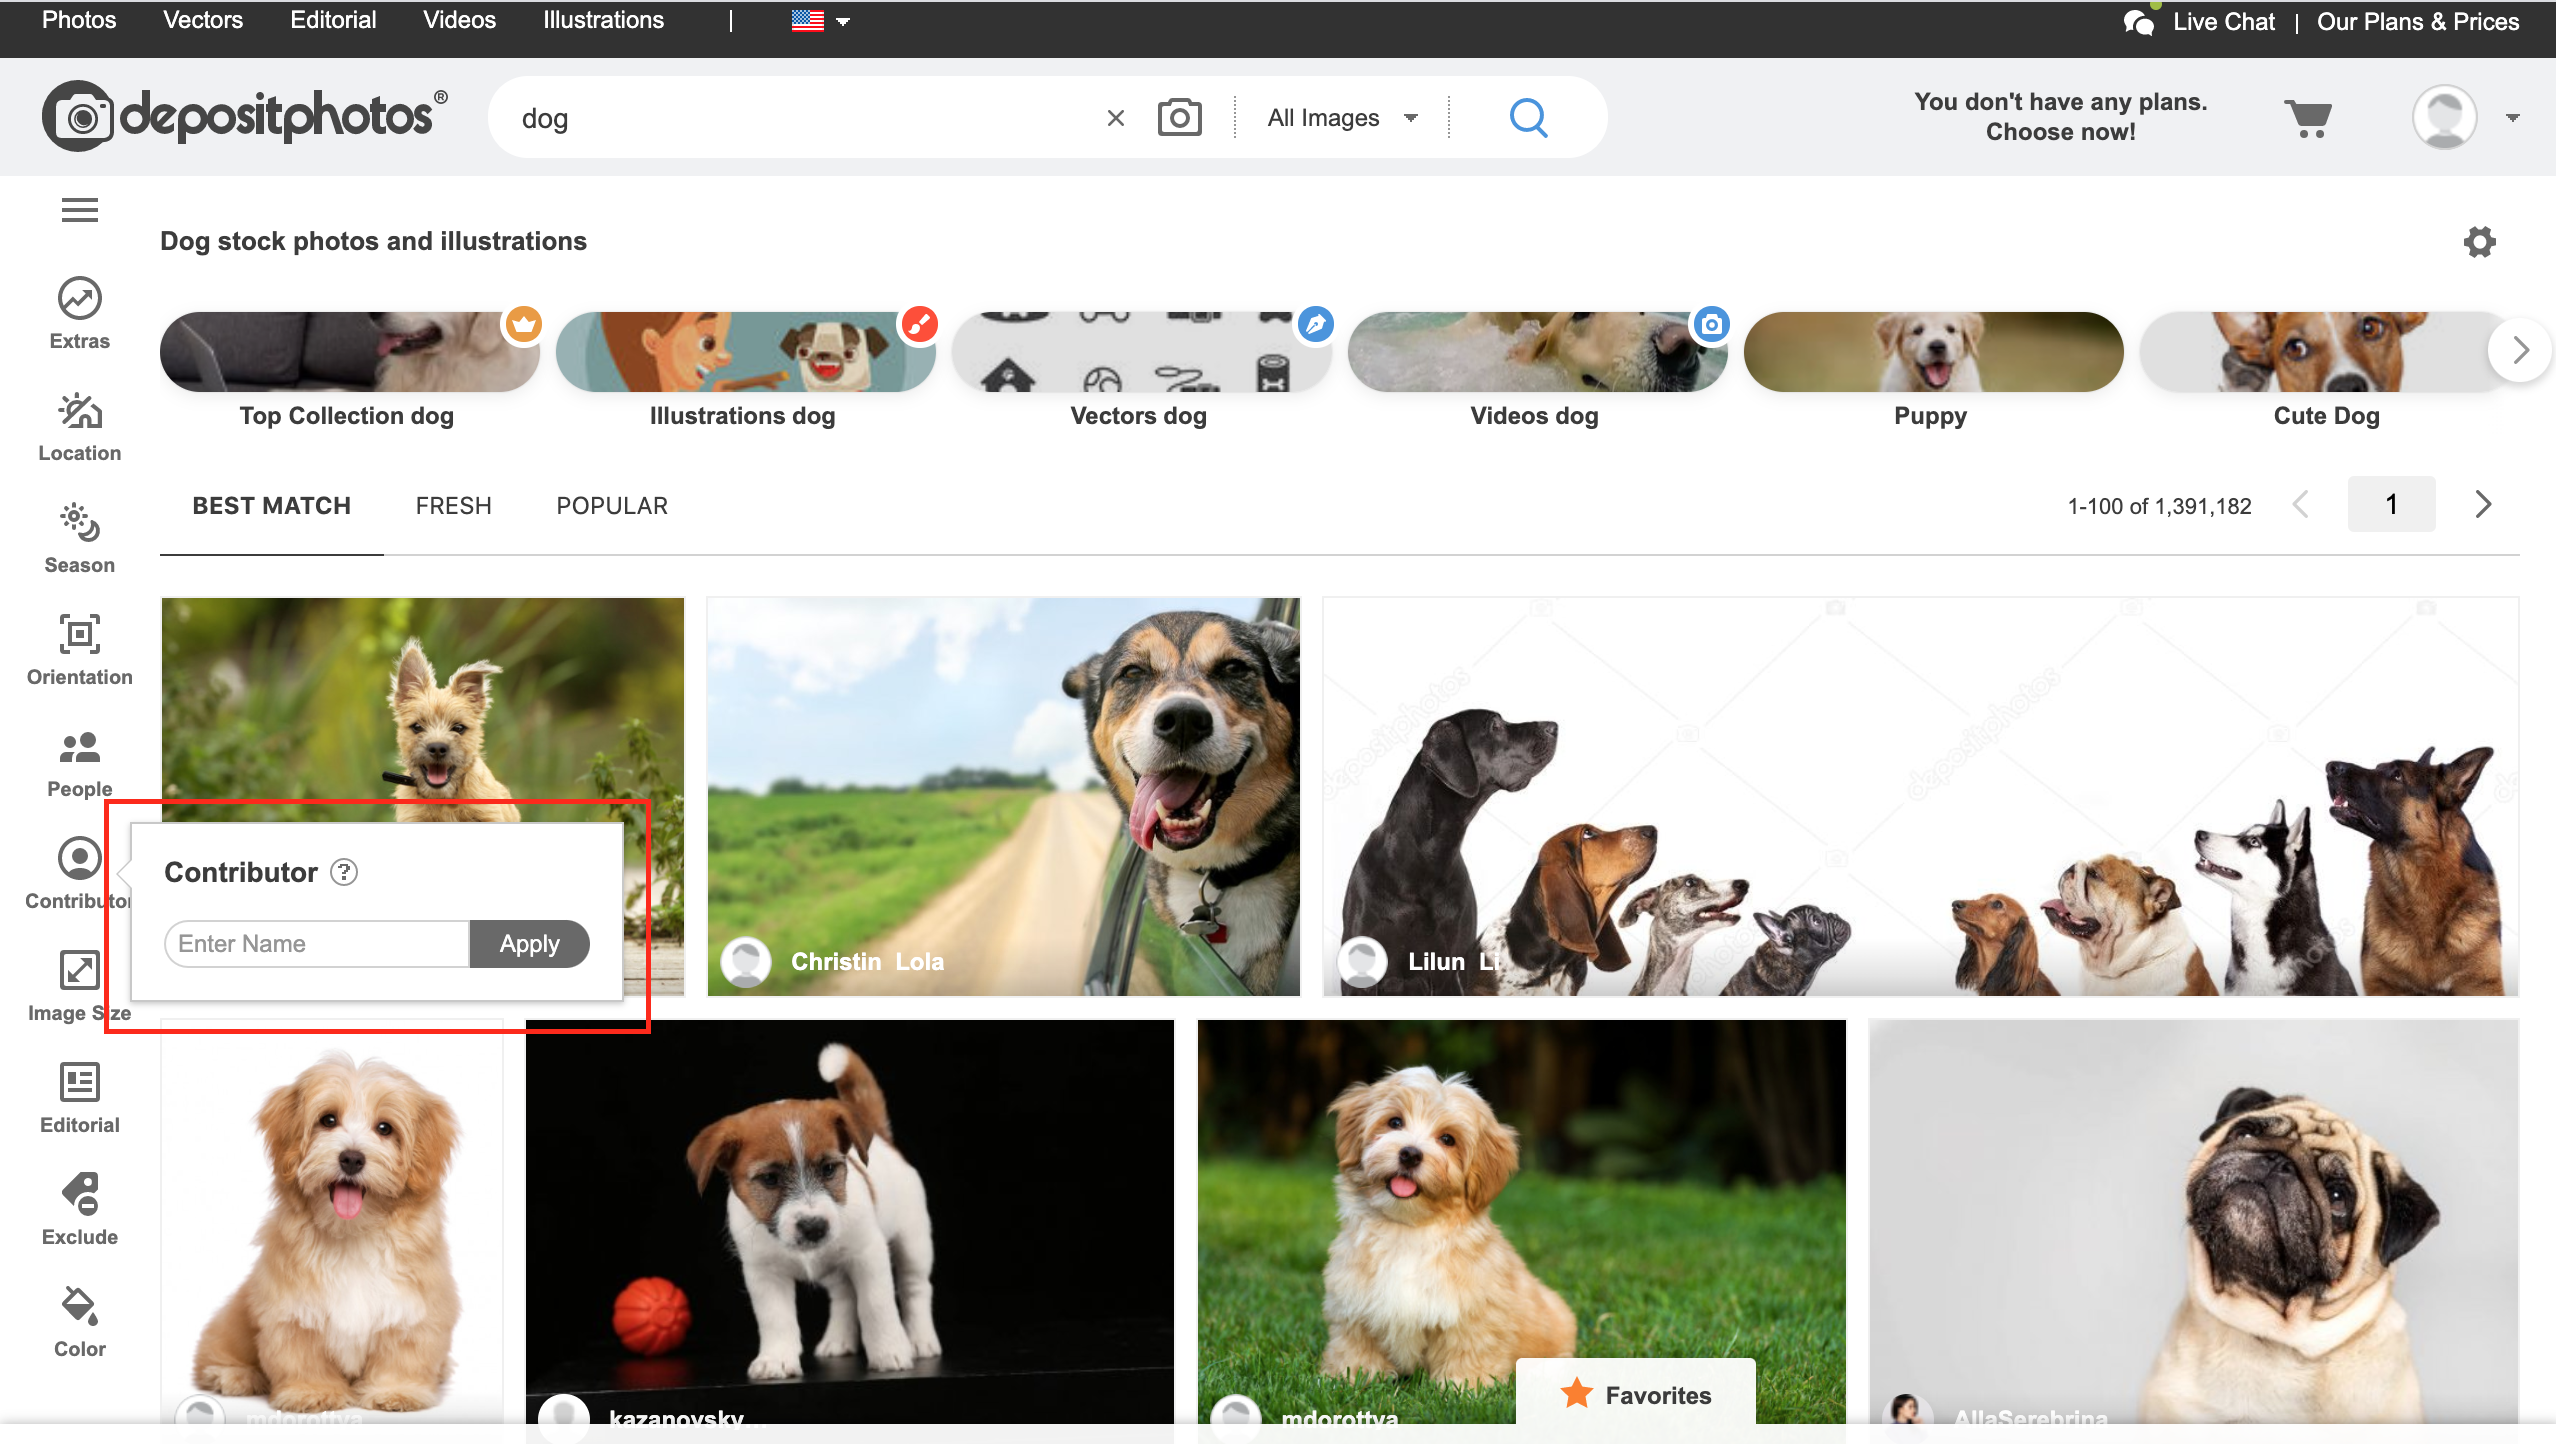 Your Complete Guide To Depositphotos Search In 2020 - Depositphotos Blog